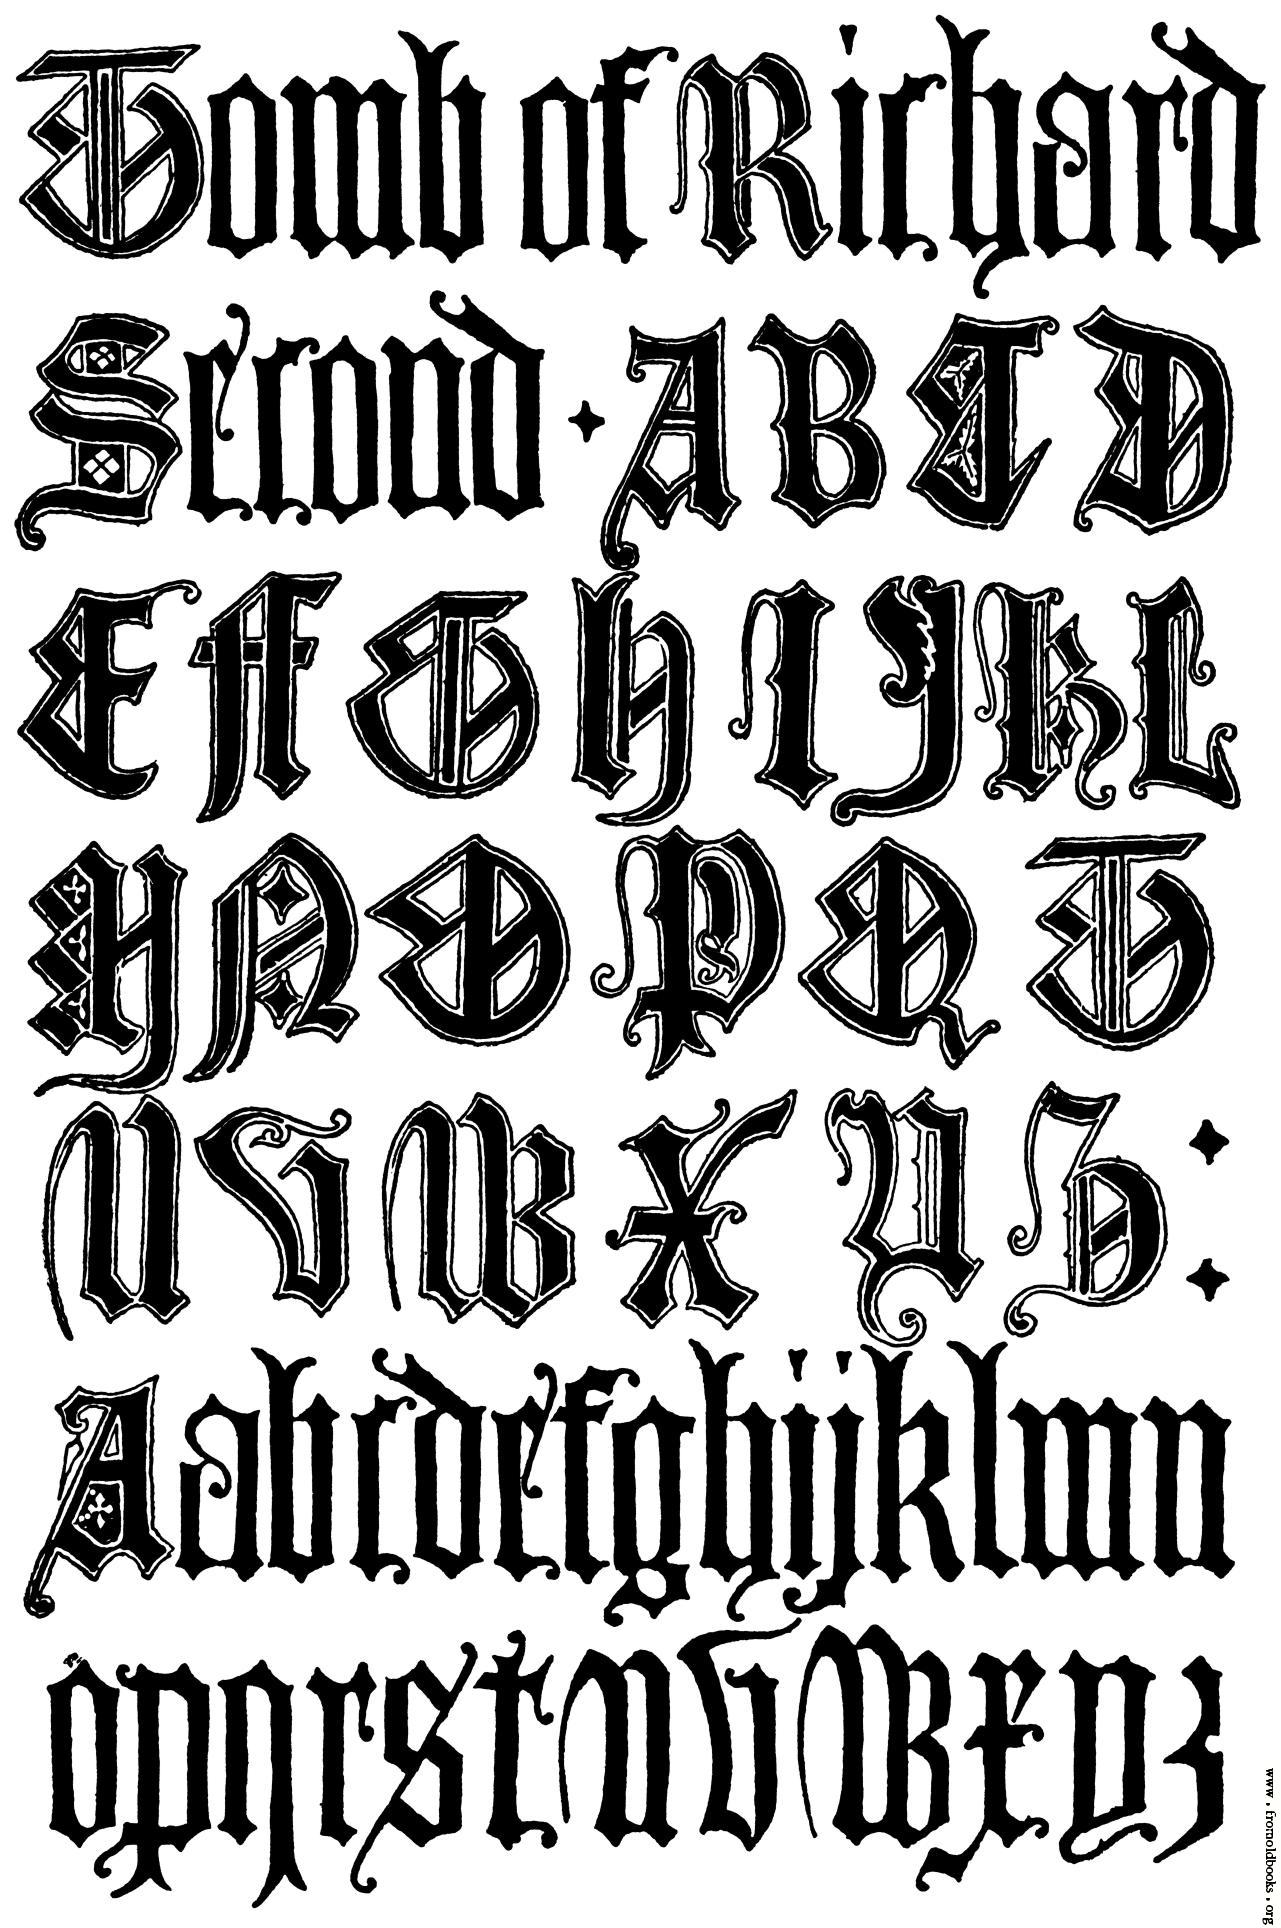 14 Old English Gothic Letters Font Images Gothic Alphabet Letters